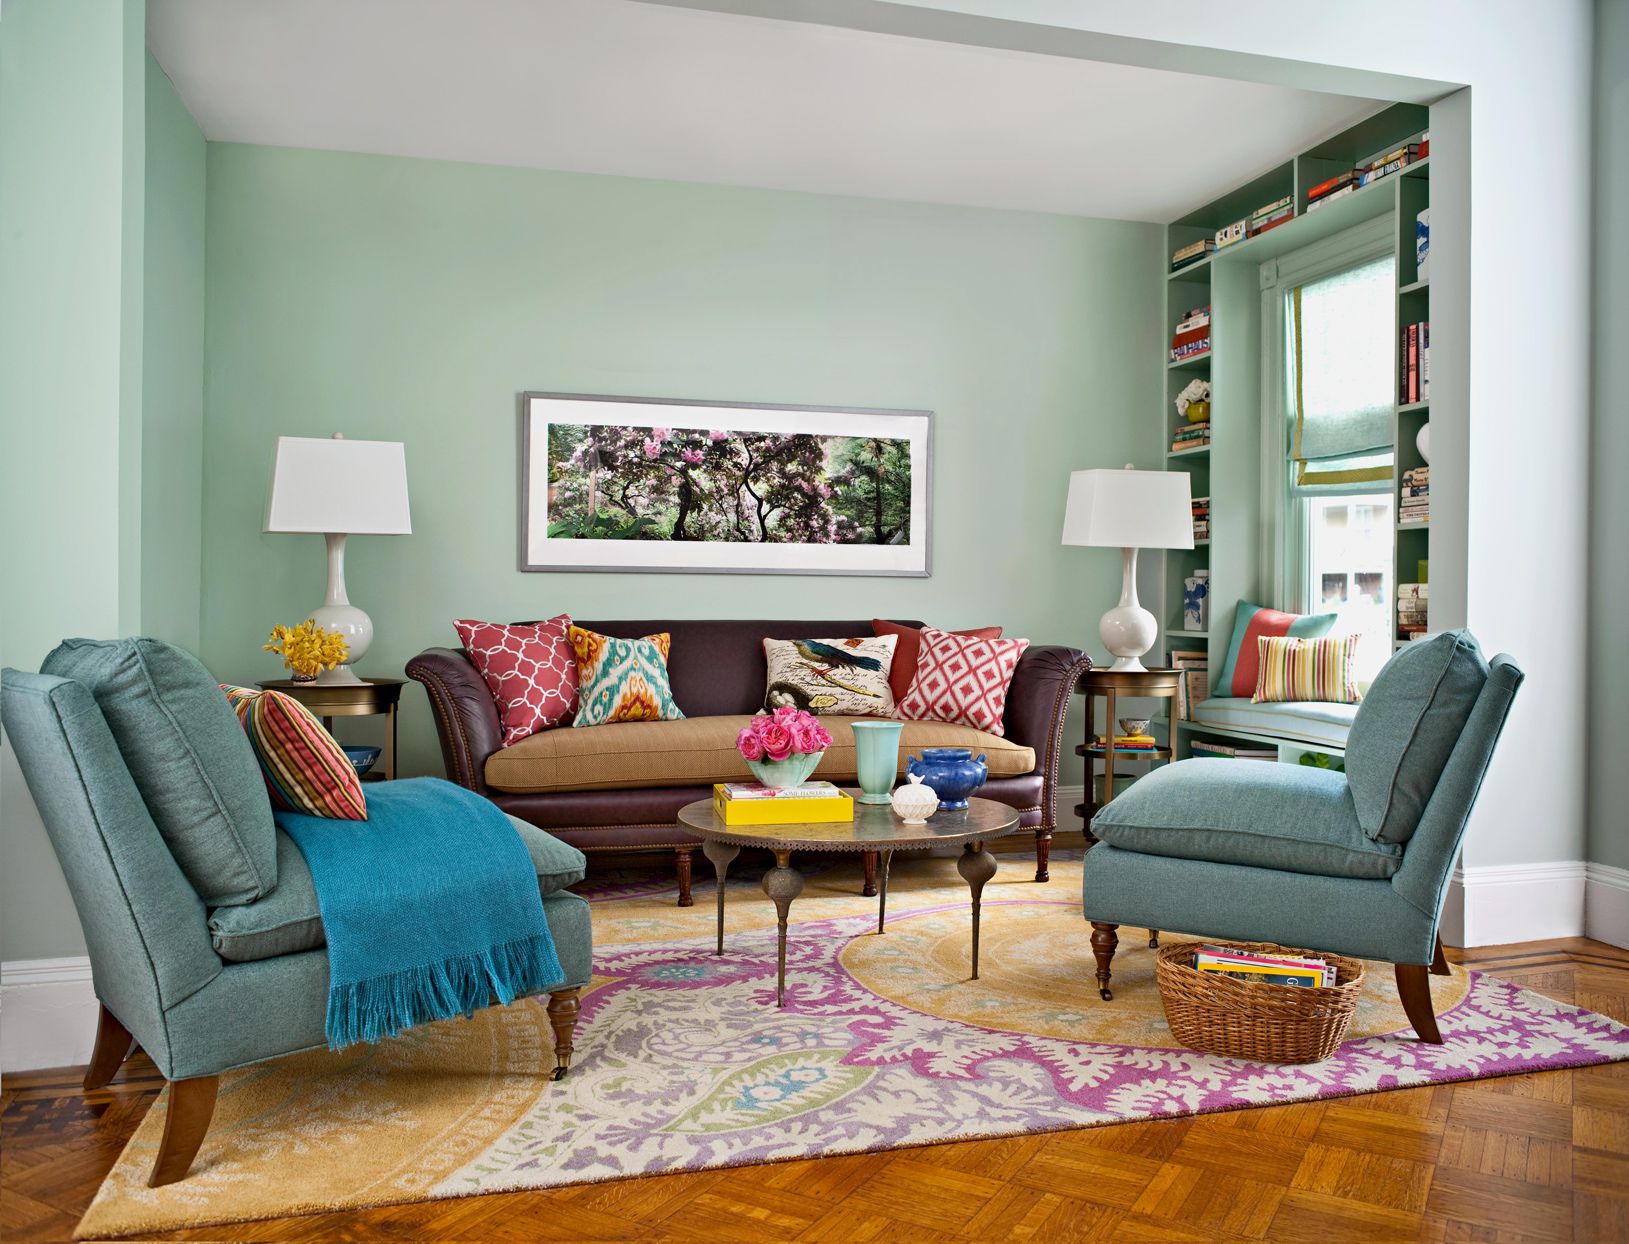 The Perfect Color Combinations For Mint Green Walls!